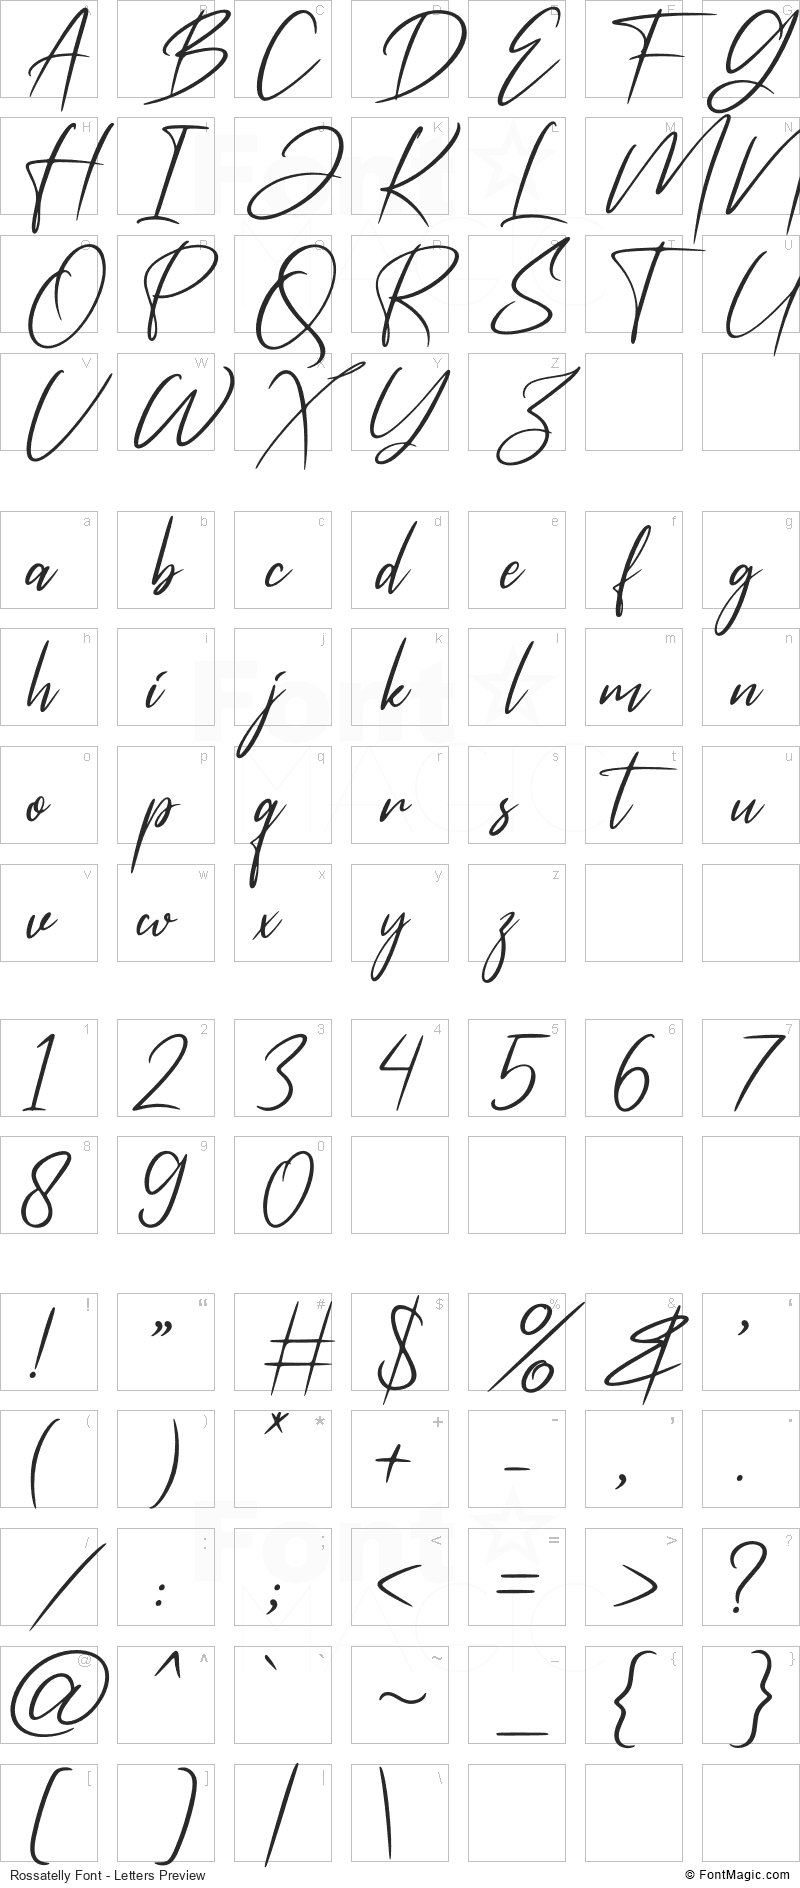 Rossatelly Font - All Latters Preview Chart